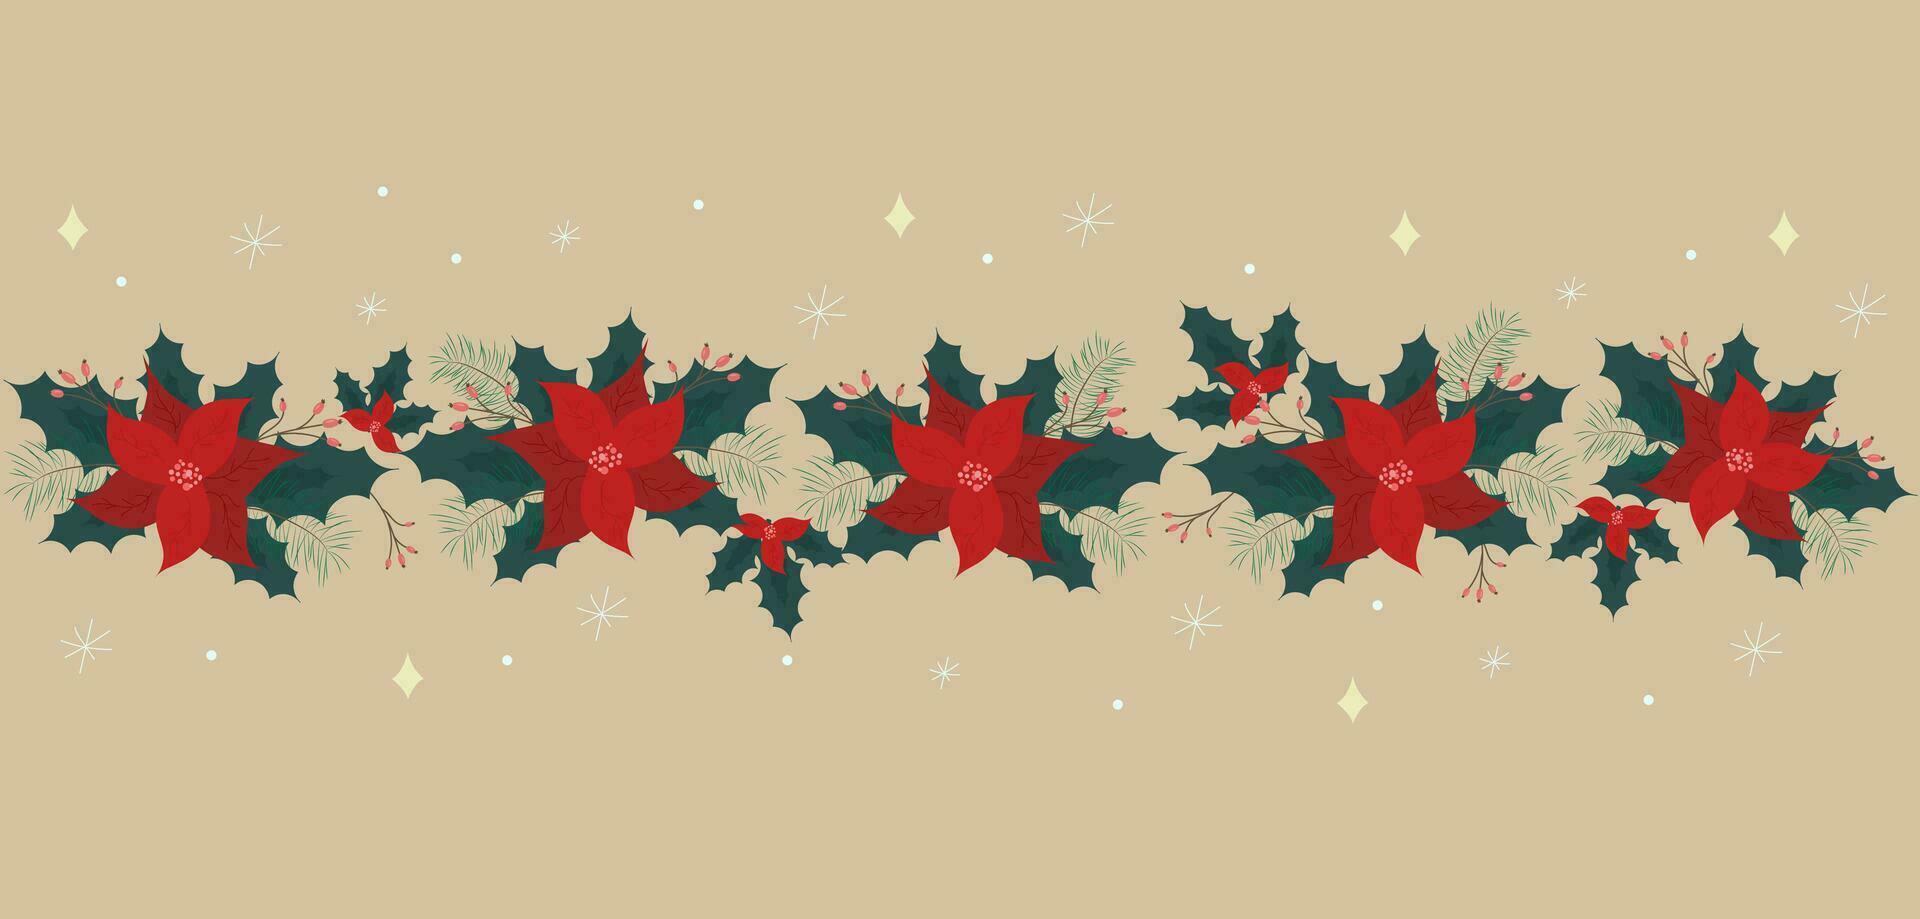 Christmas background with garland of poinsetties, berries, leaves and branches on beige background. For cards, backgrounds, prints. vector